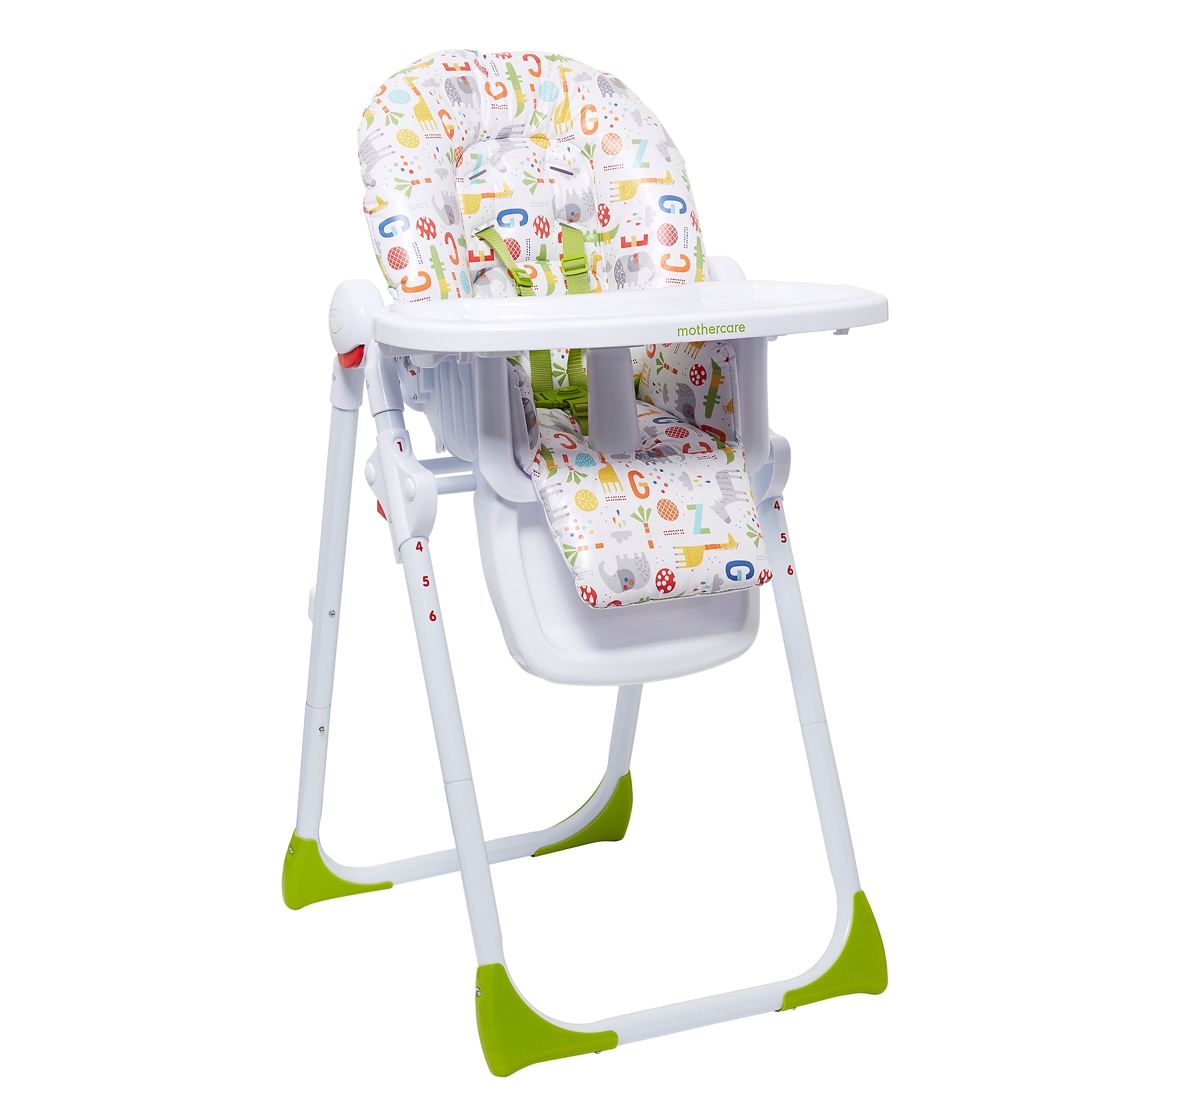 Mothercare | Mothercare Hello Friends Baby High Chair Green 2